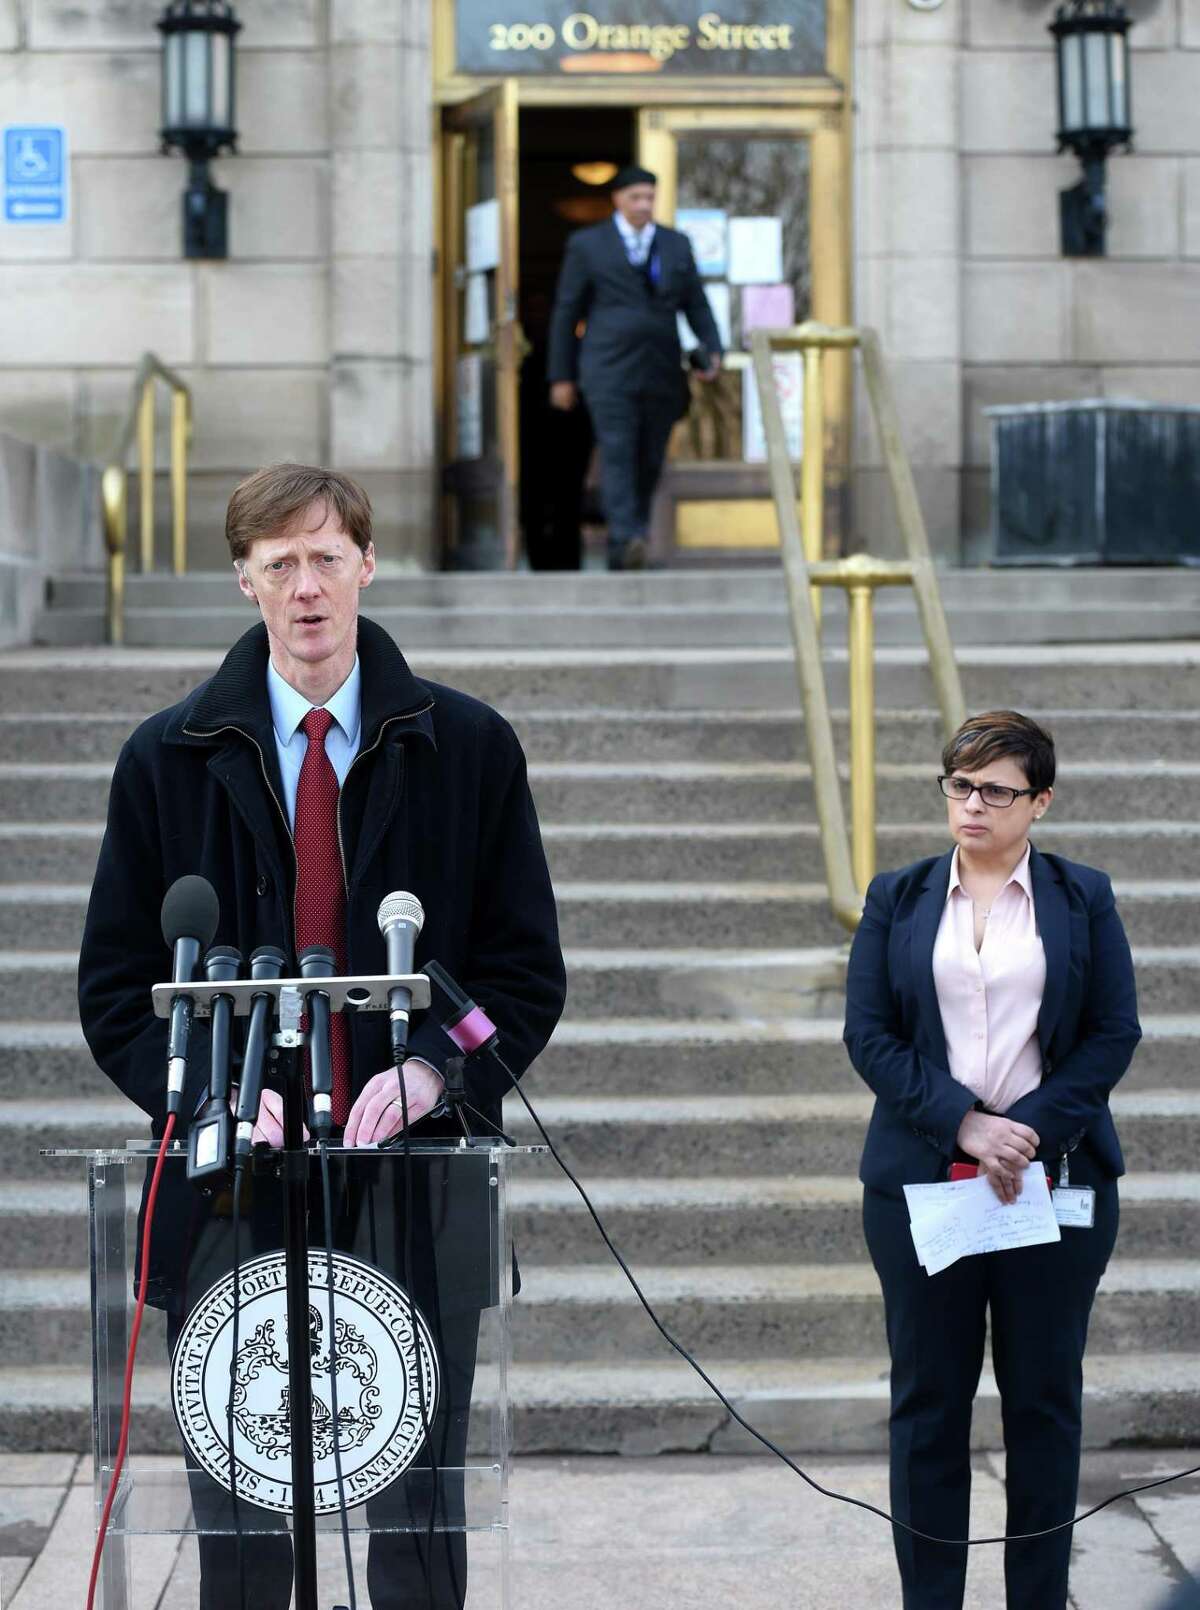 New Haven Mayor Justin Elicker holds a press briefing outside of the Hall of Records in New Haven on March 20, 2020. At right is New Haven Director of Health Maritza Bond.